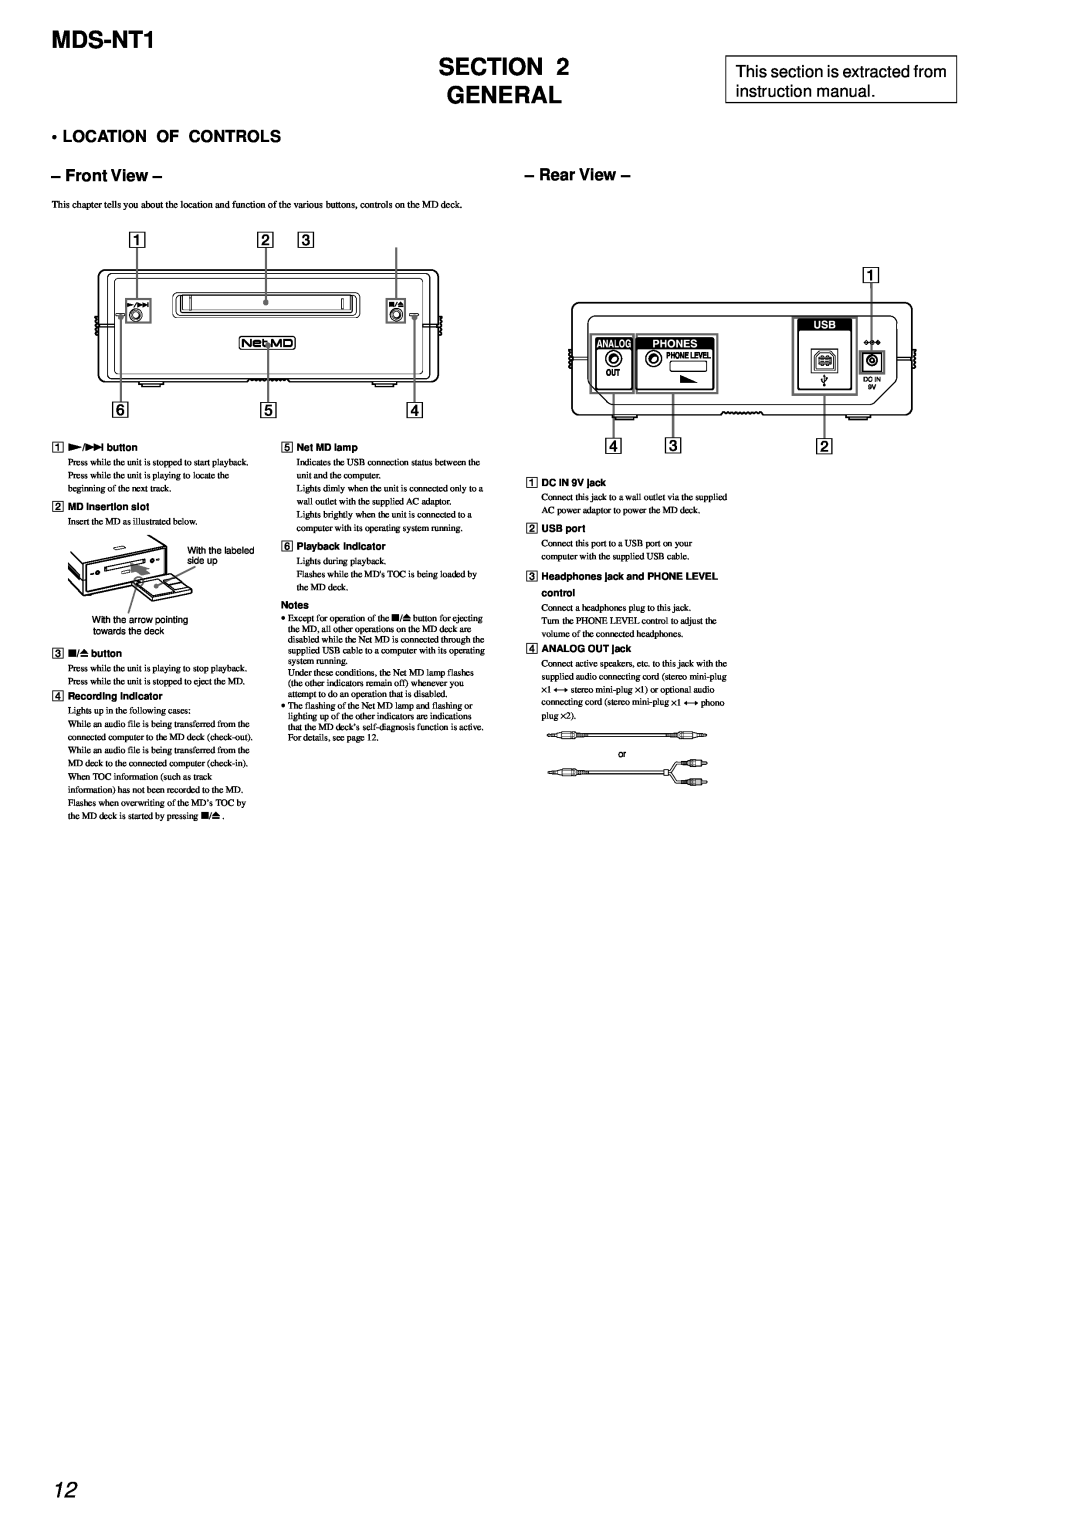 Sony service manual MDS-NT1 SECTION GENERAL, Location Of Controls, Front View 